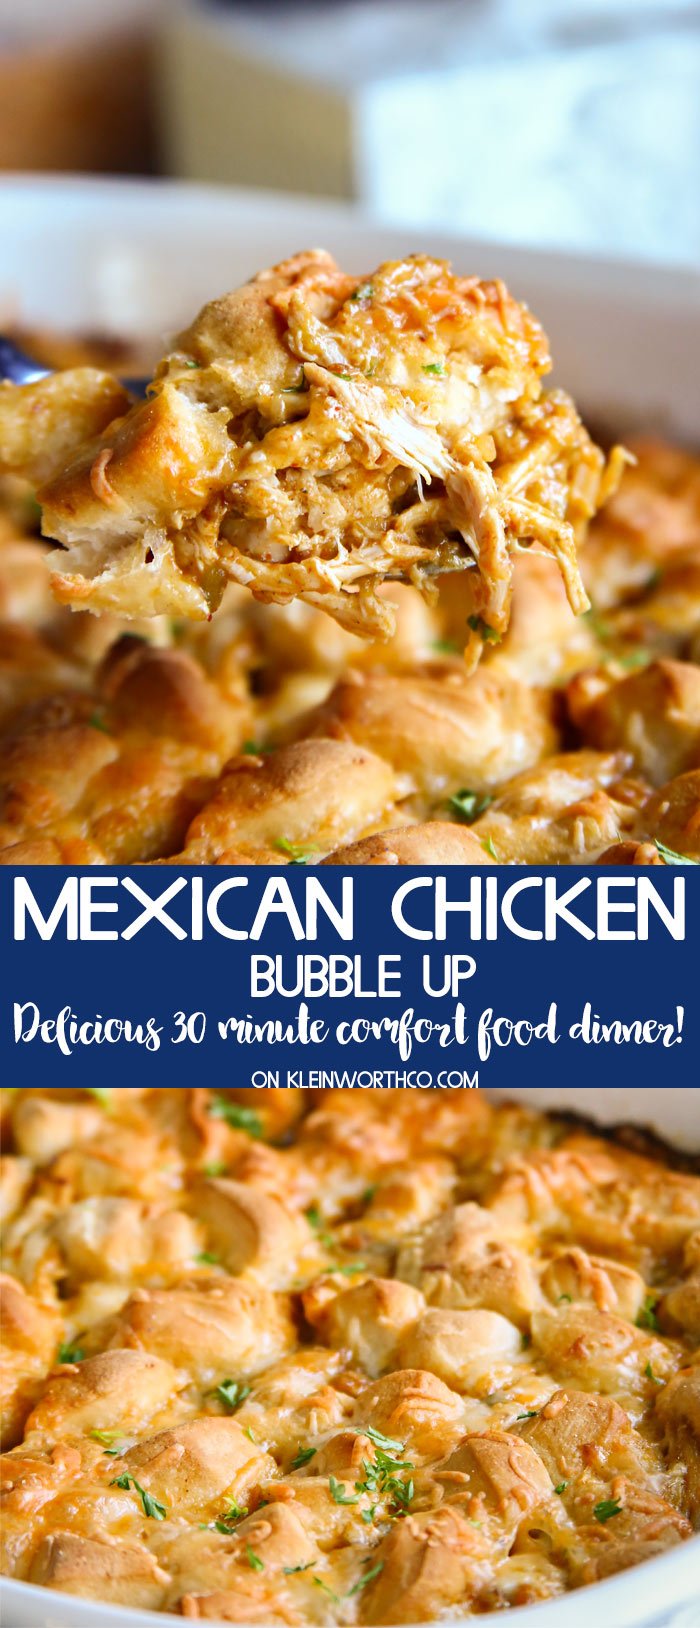 Mexican Chicken Bubble Up Casserole - Taste of the Frontier